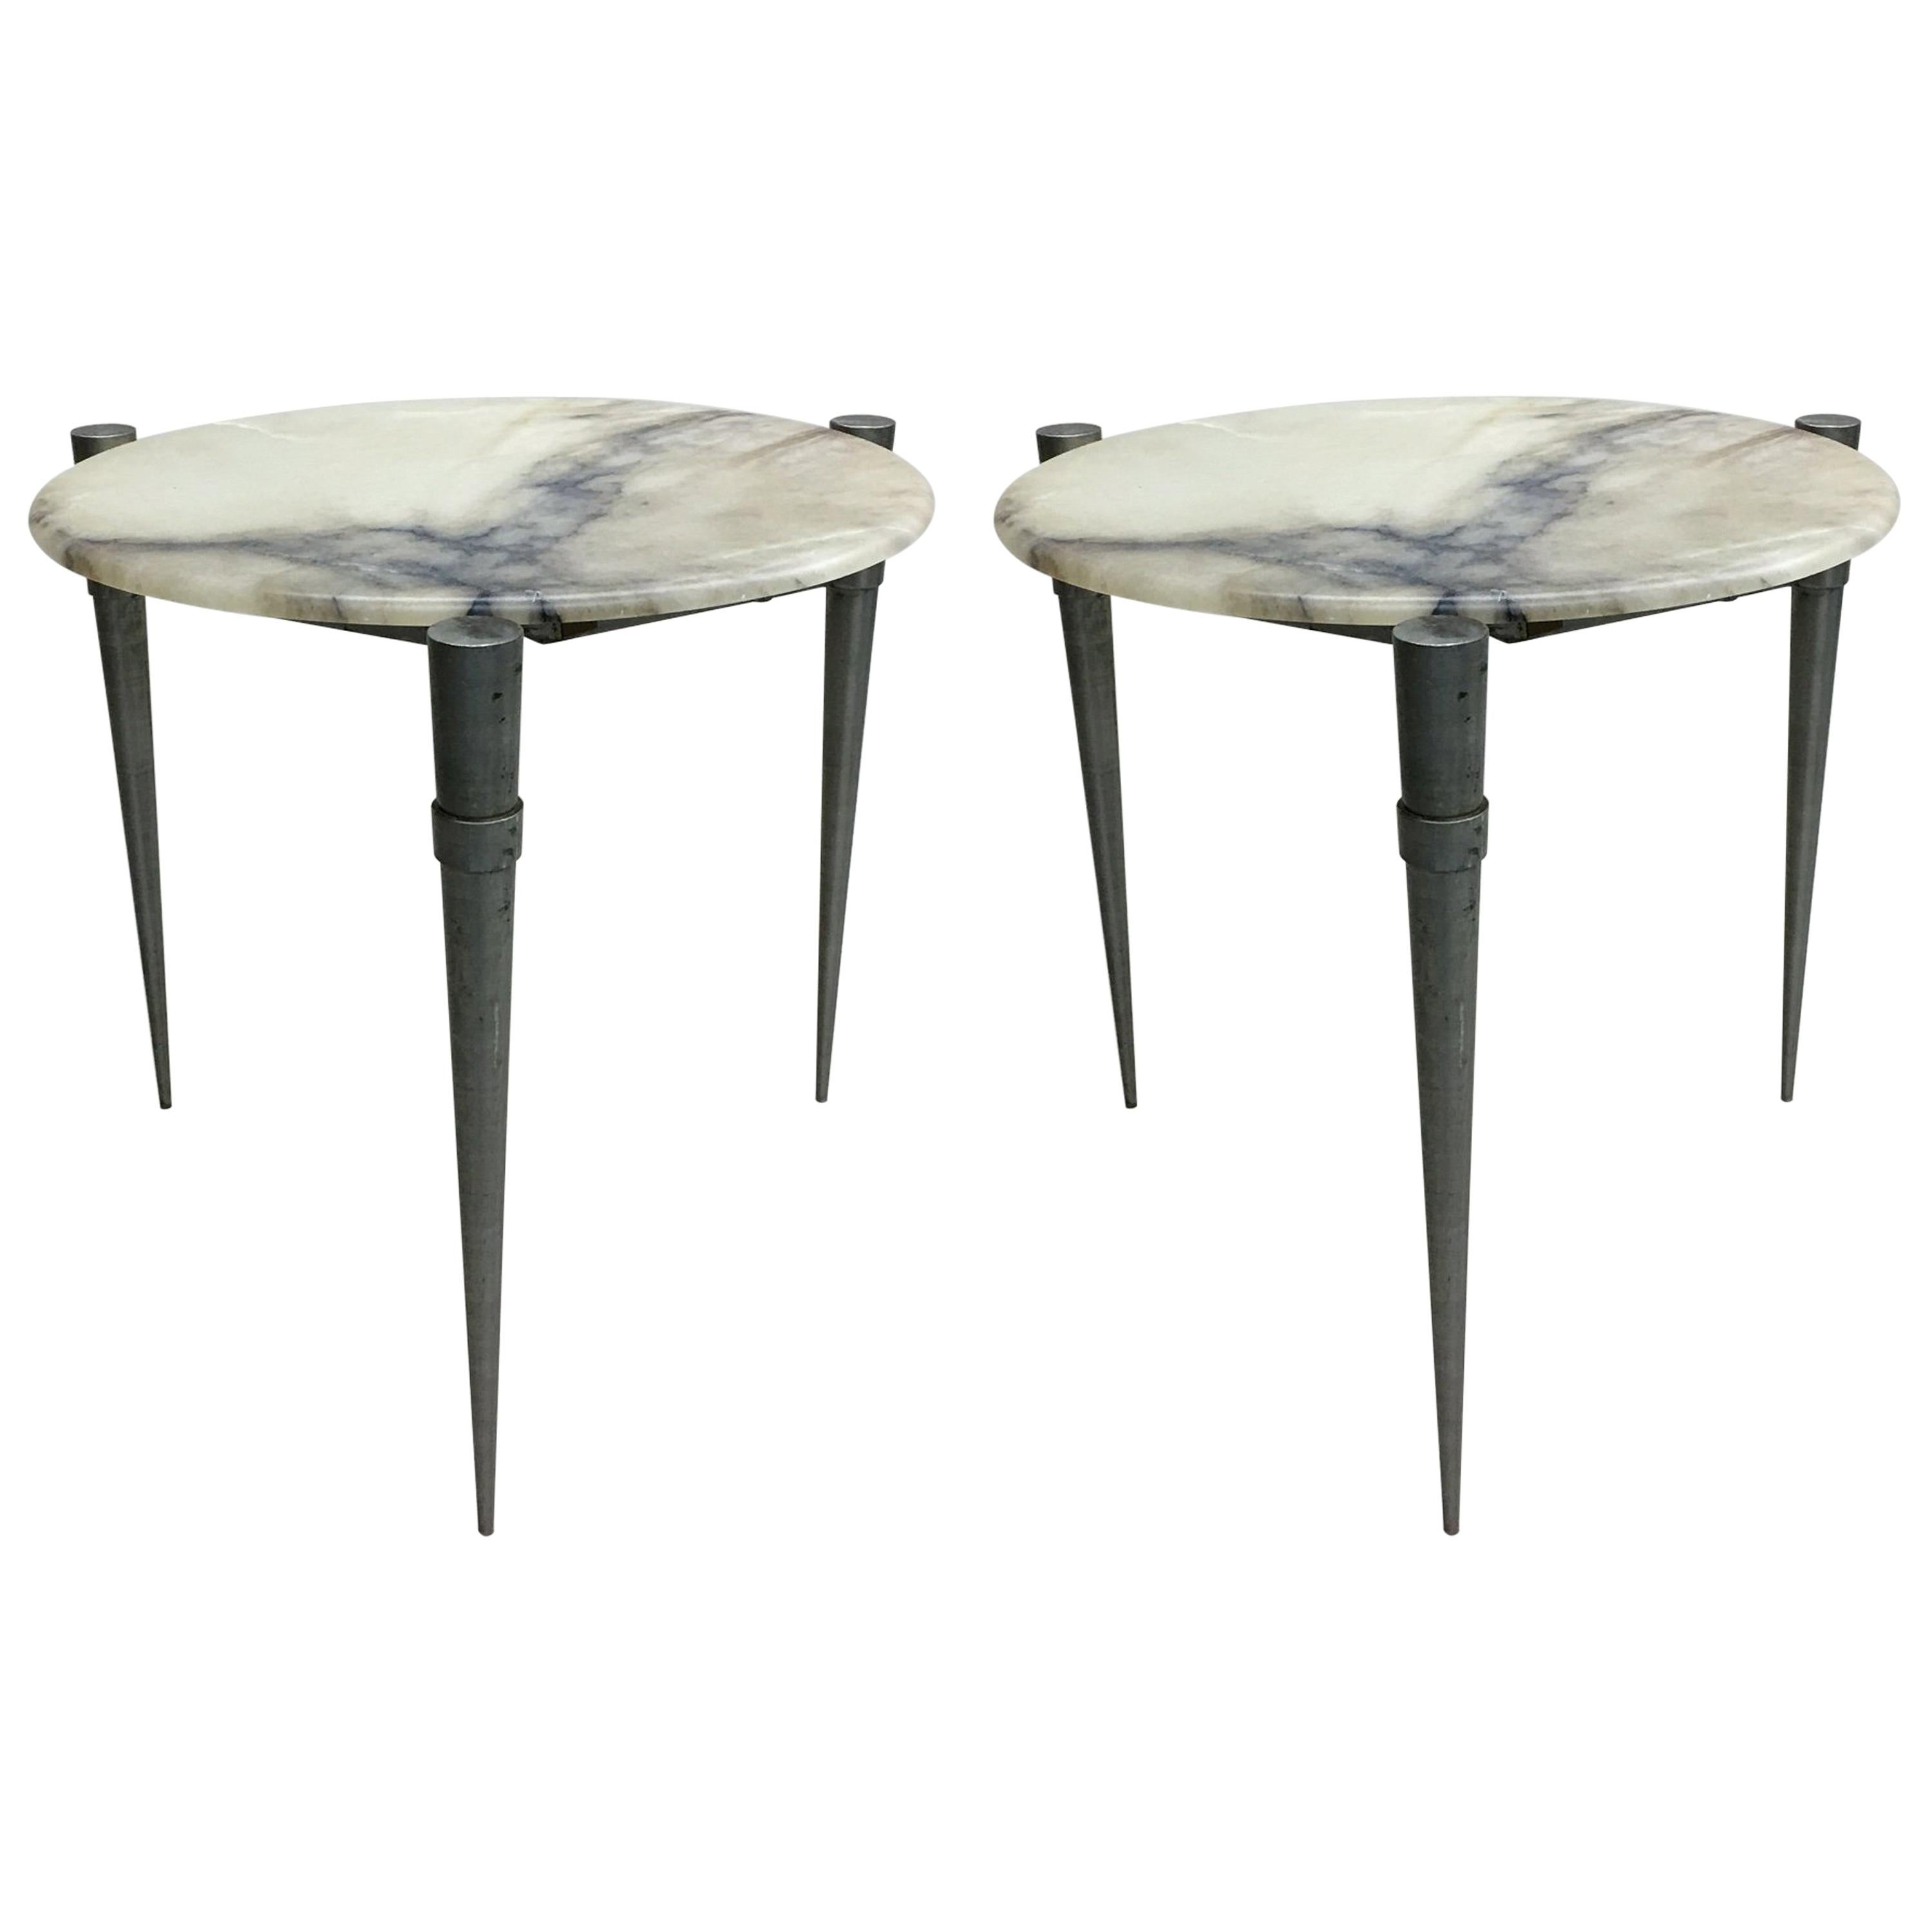 Pair of French Mid-Century Modern Steel and Alabaster Side Tables, circa 1950